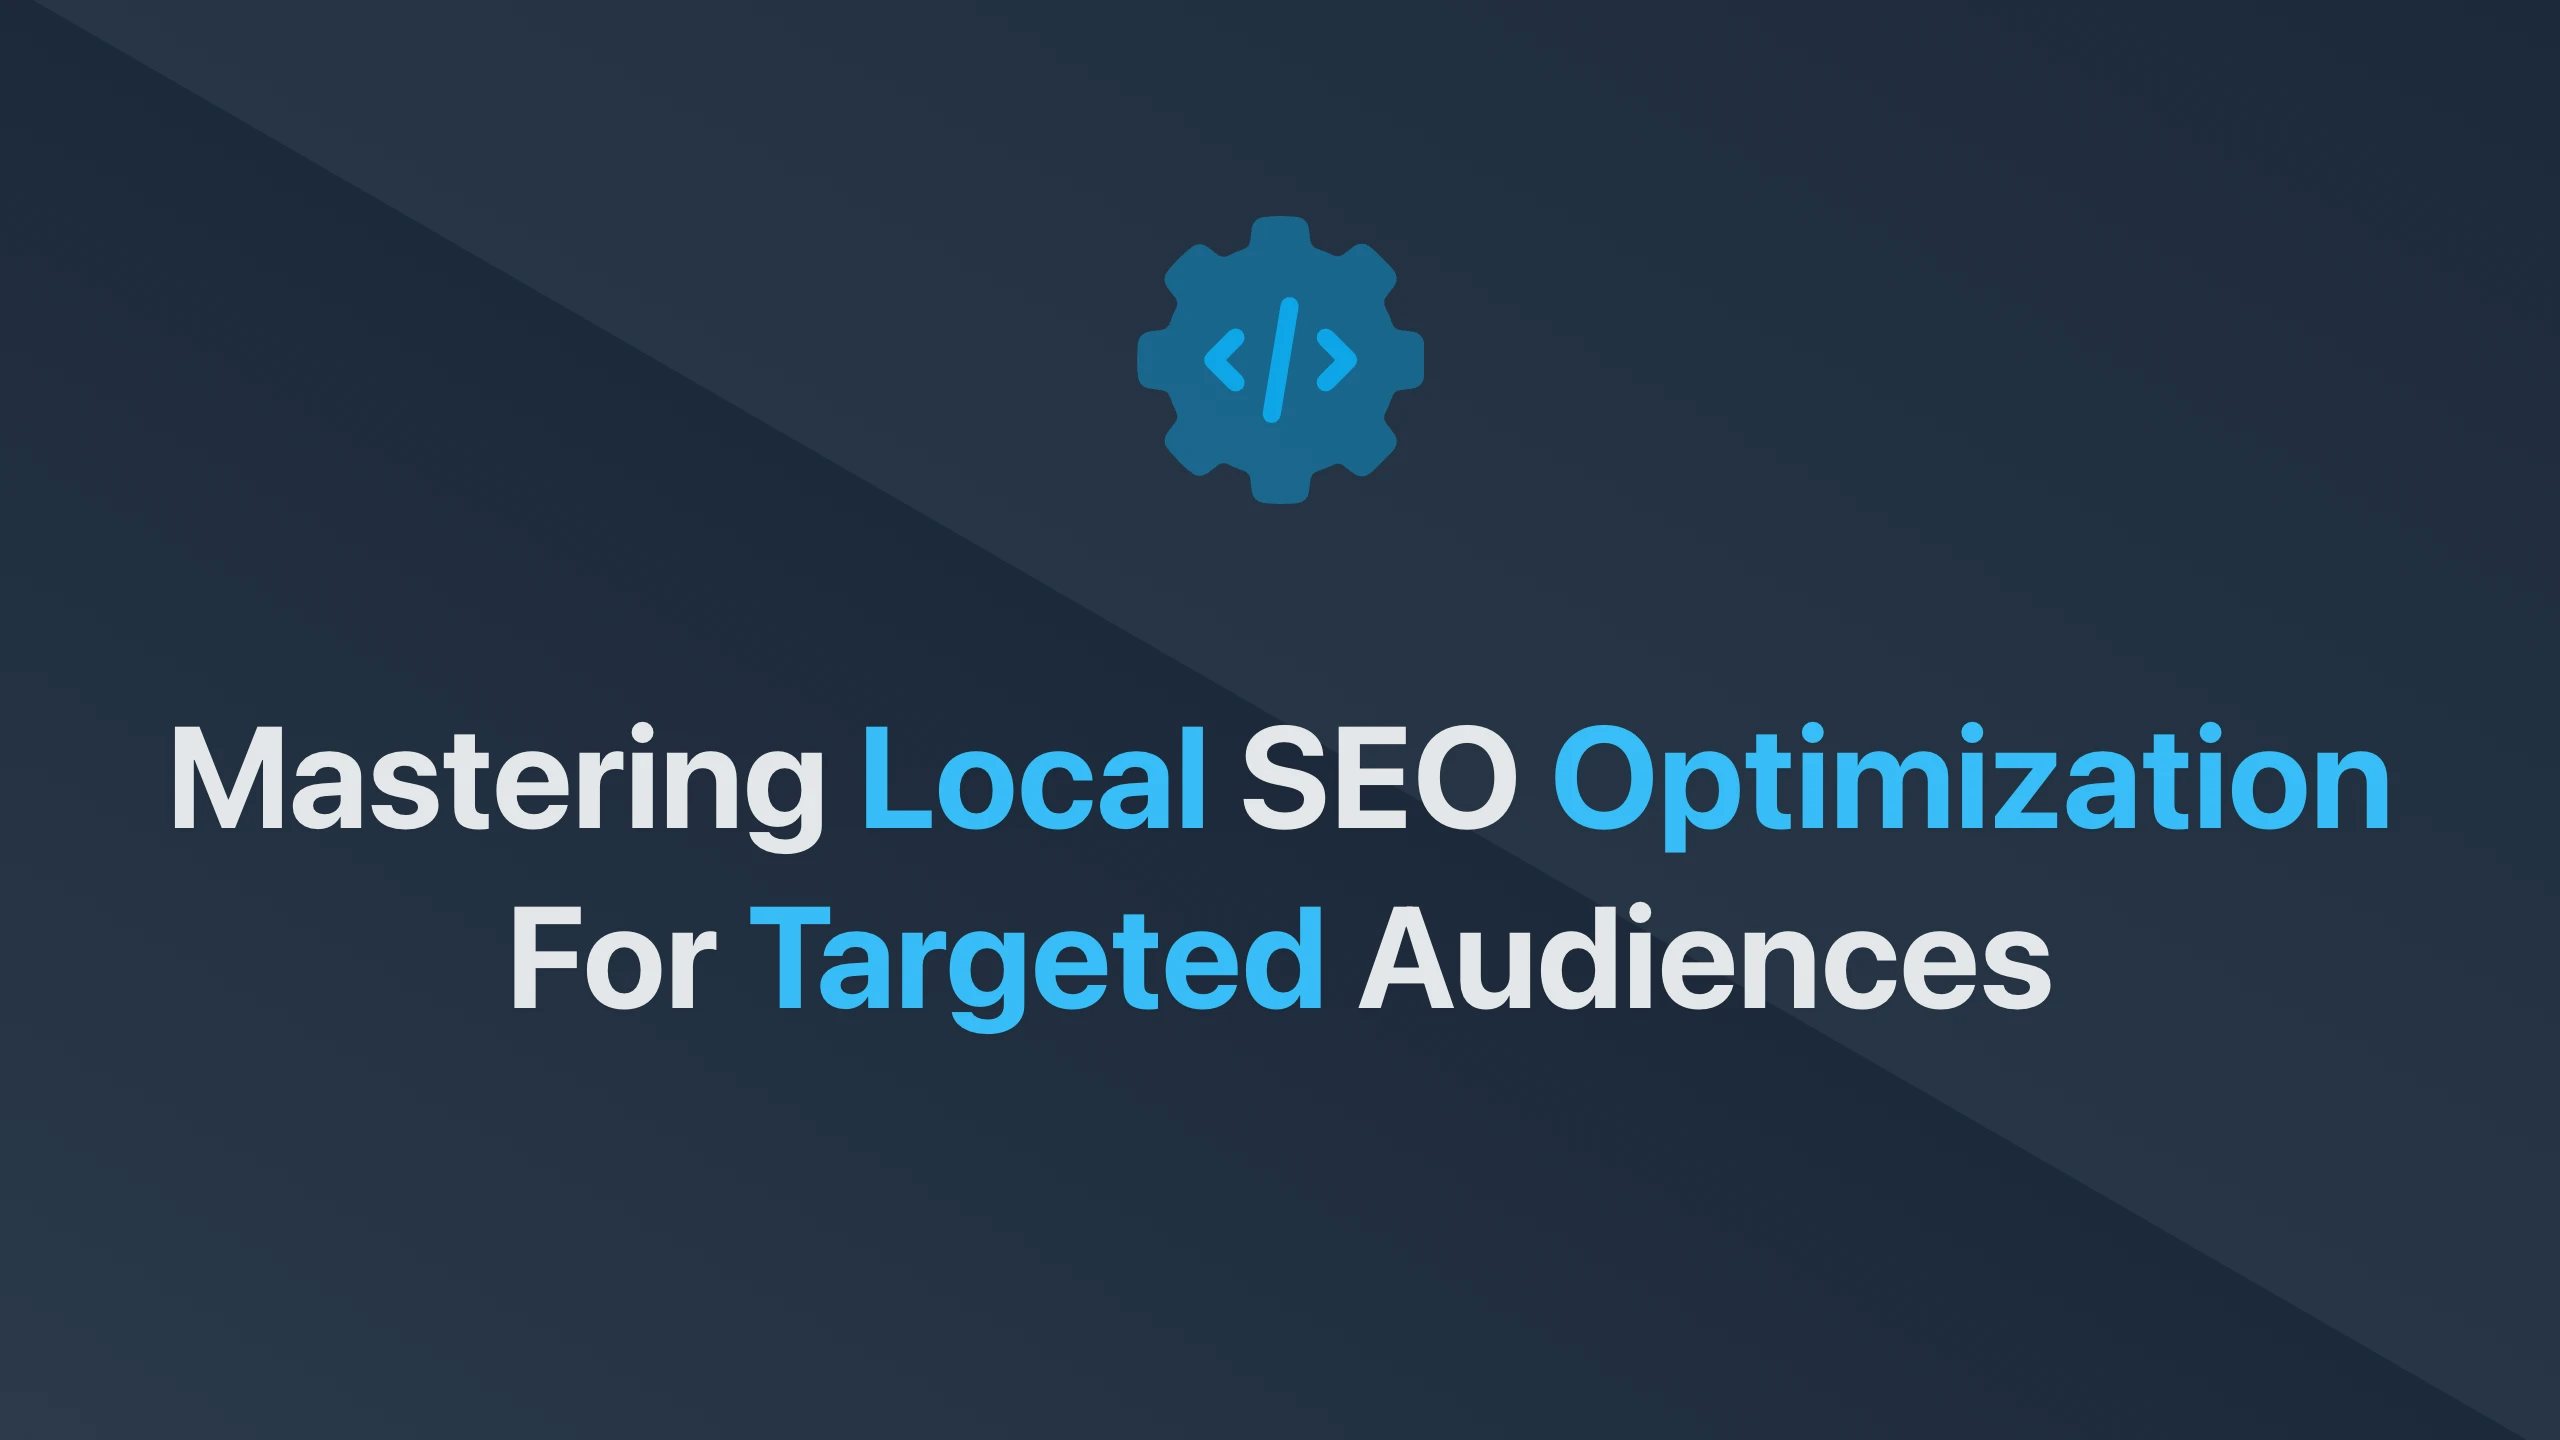 Cover Image for Mastering Local SEO Optimization for Targeted Audiences